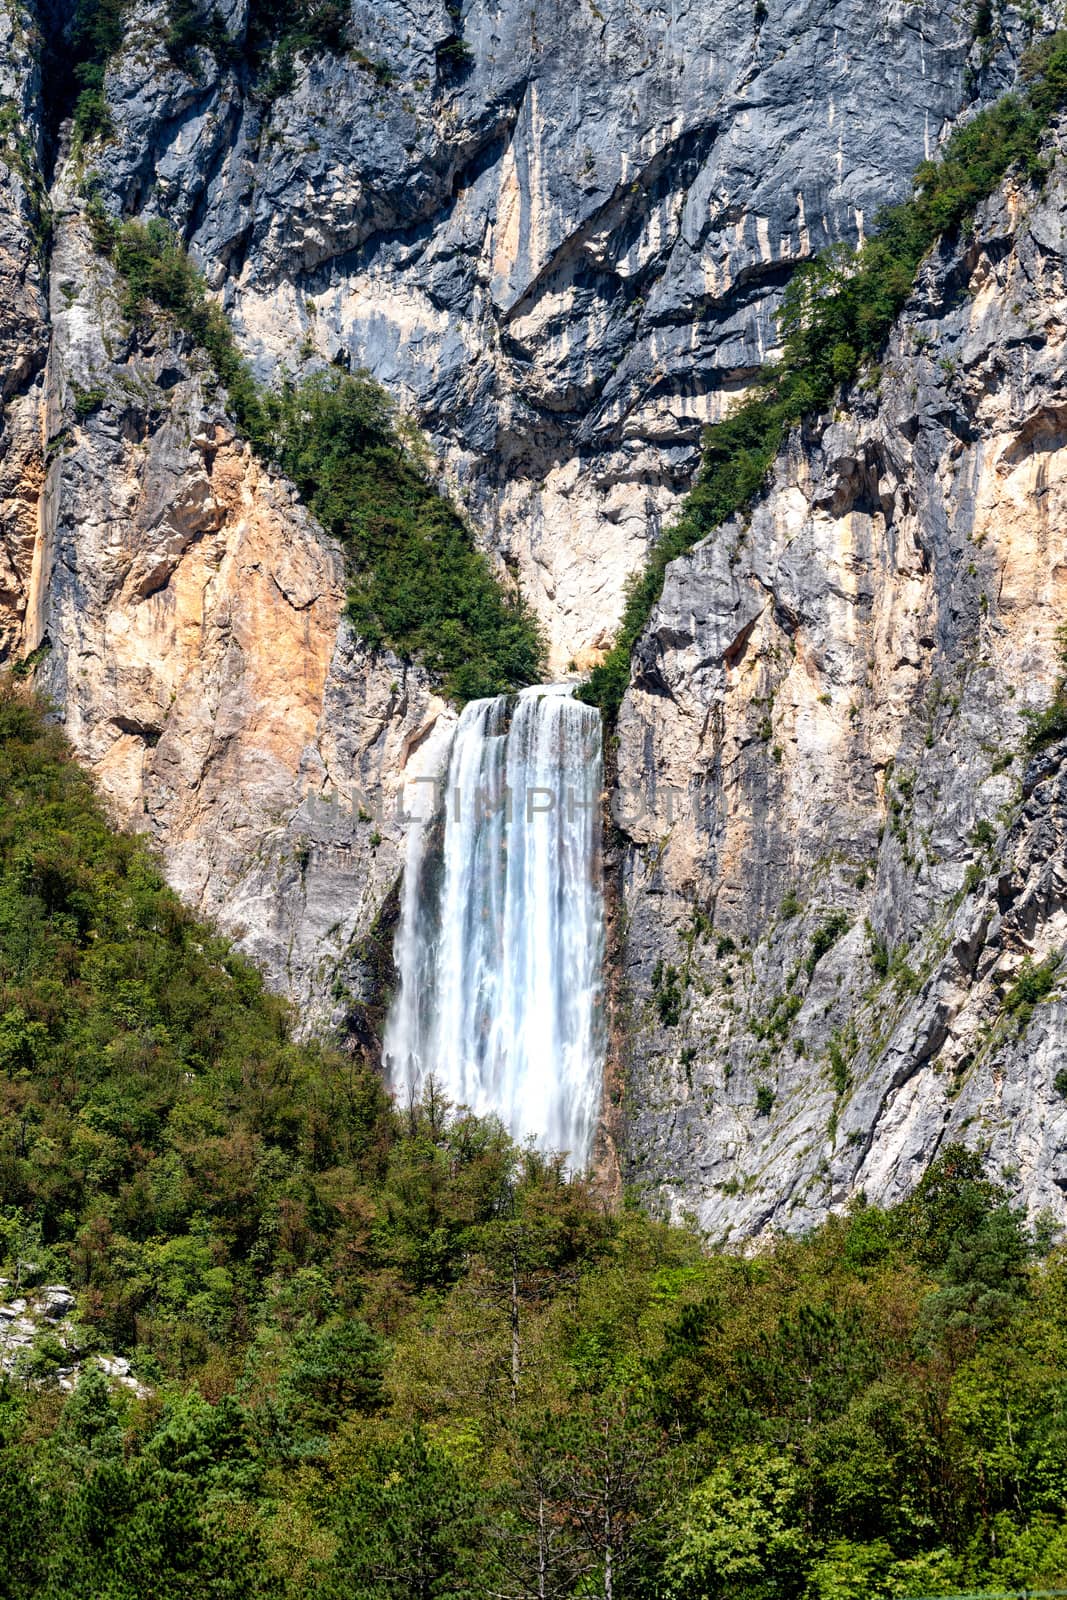 Famous slovenian waterfall Boka Alps in Triglav National park, Slovenia is one of the highest and most magnificient waterfalls in european Alps with 106m in height, vertical close up zoom, rare view